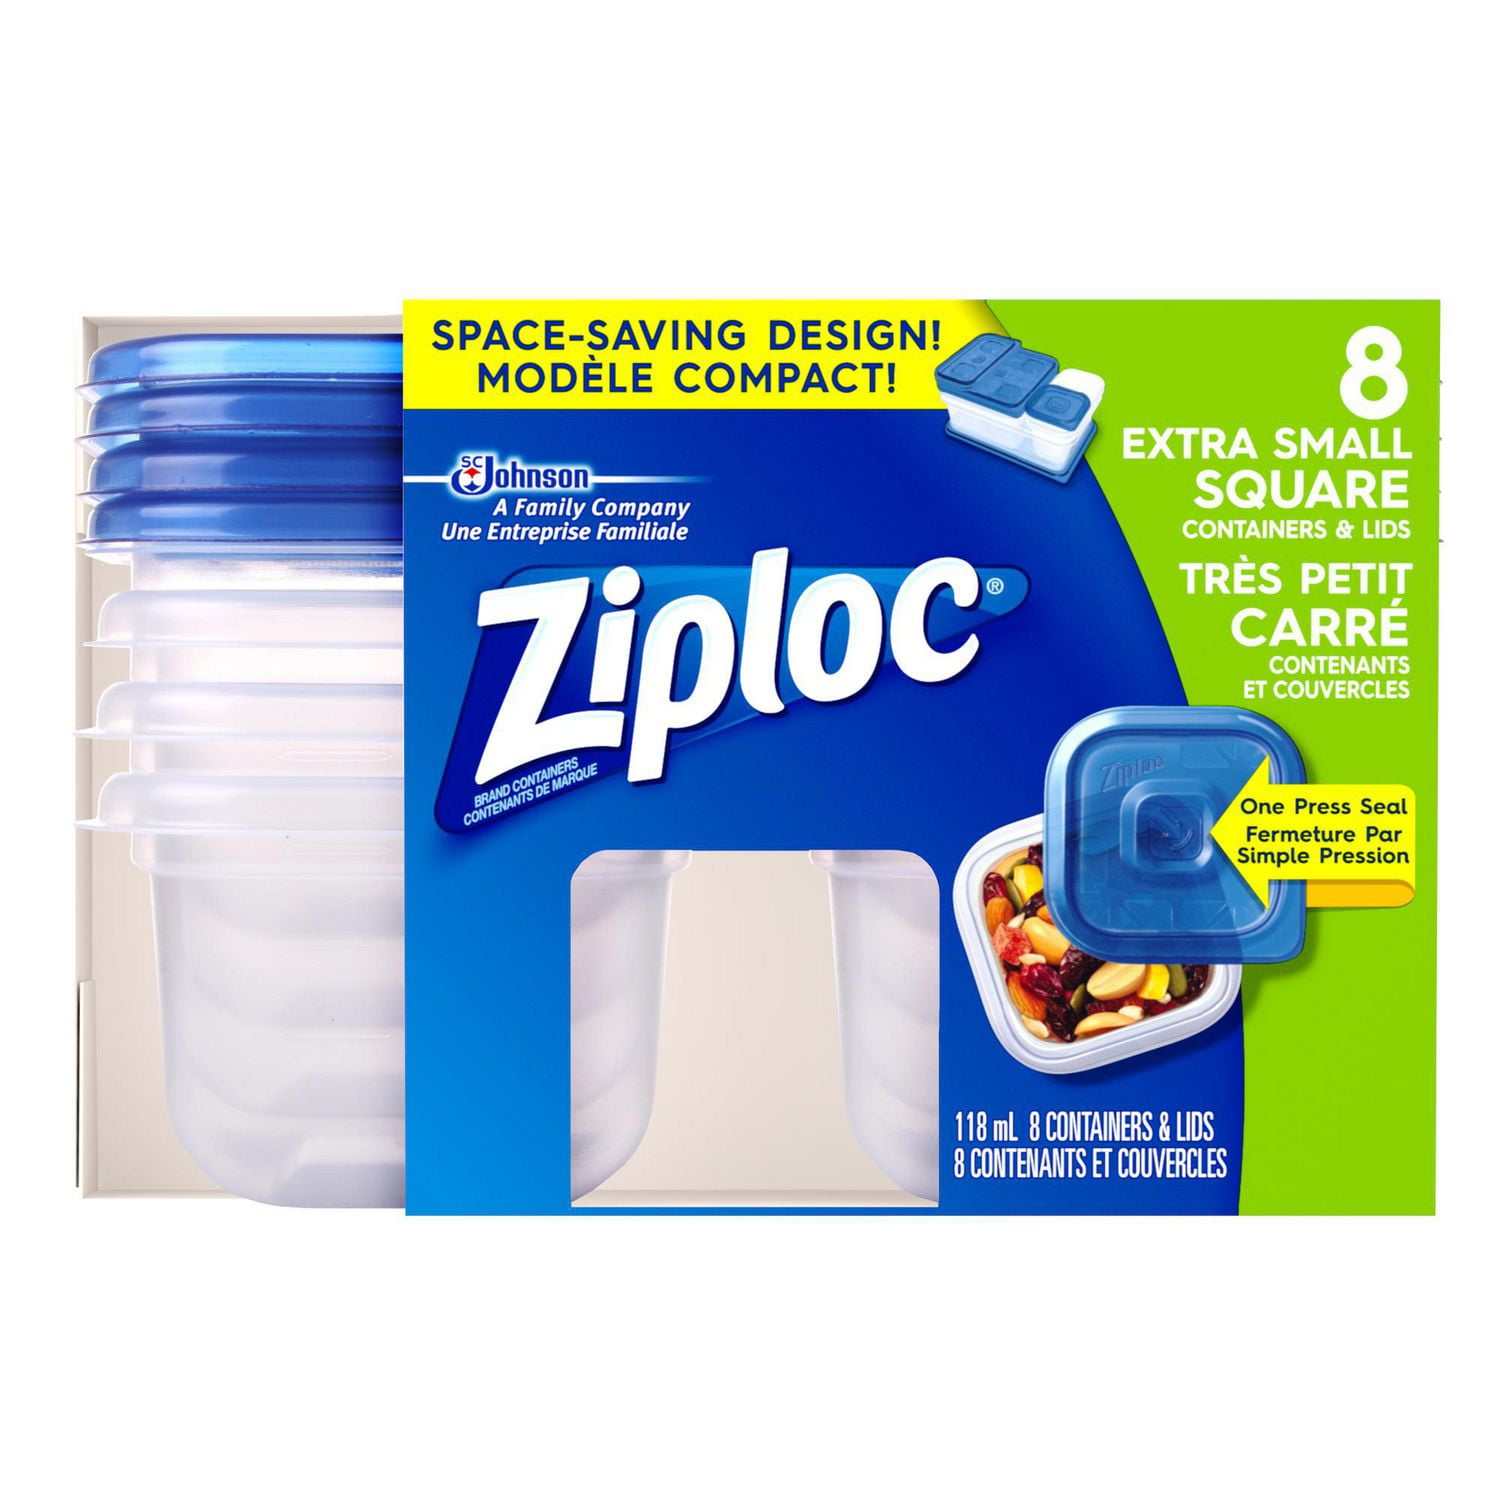 Ziploc® Food Storage Containers with Smart Snap Technology